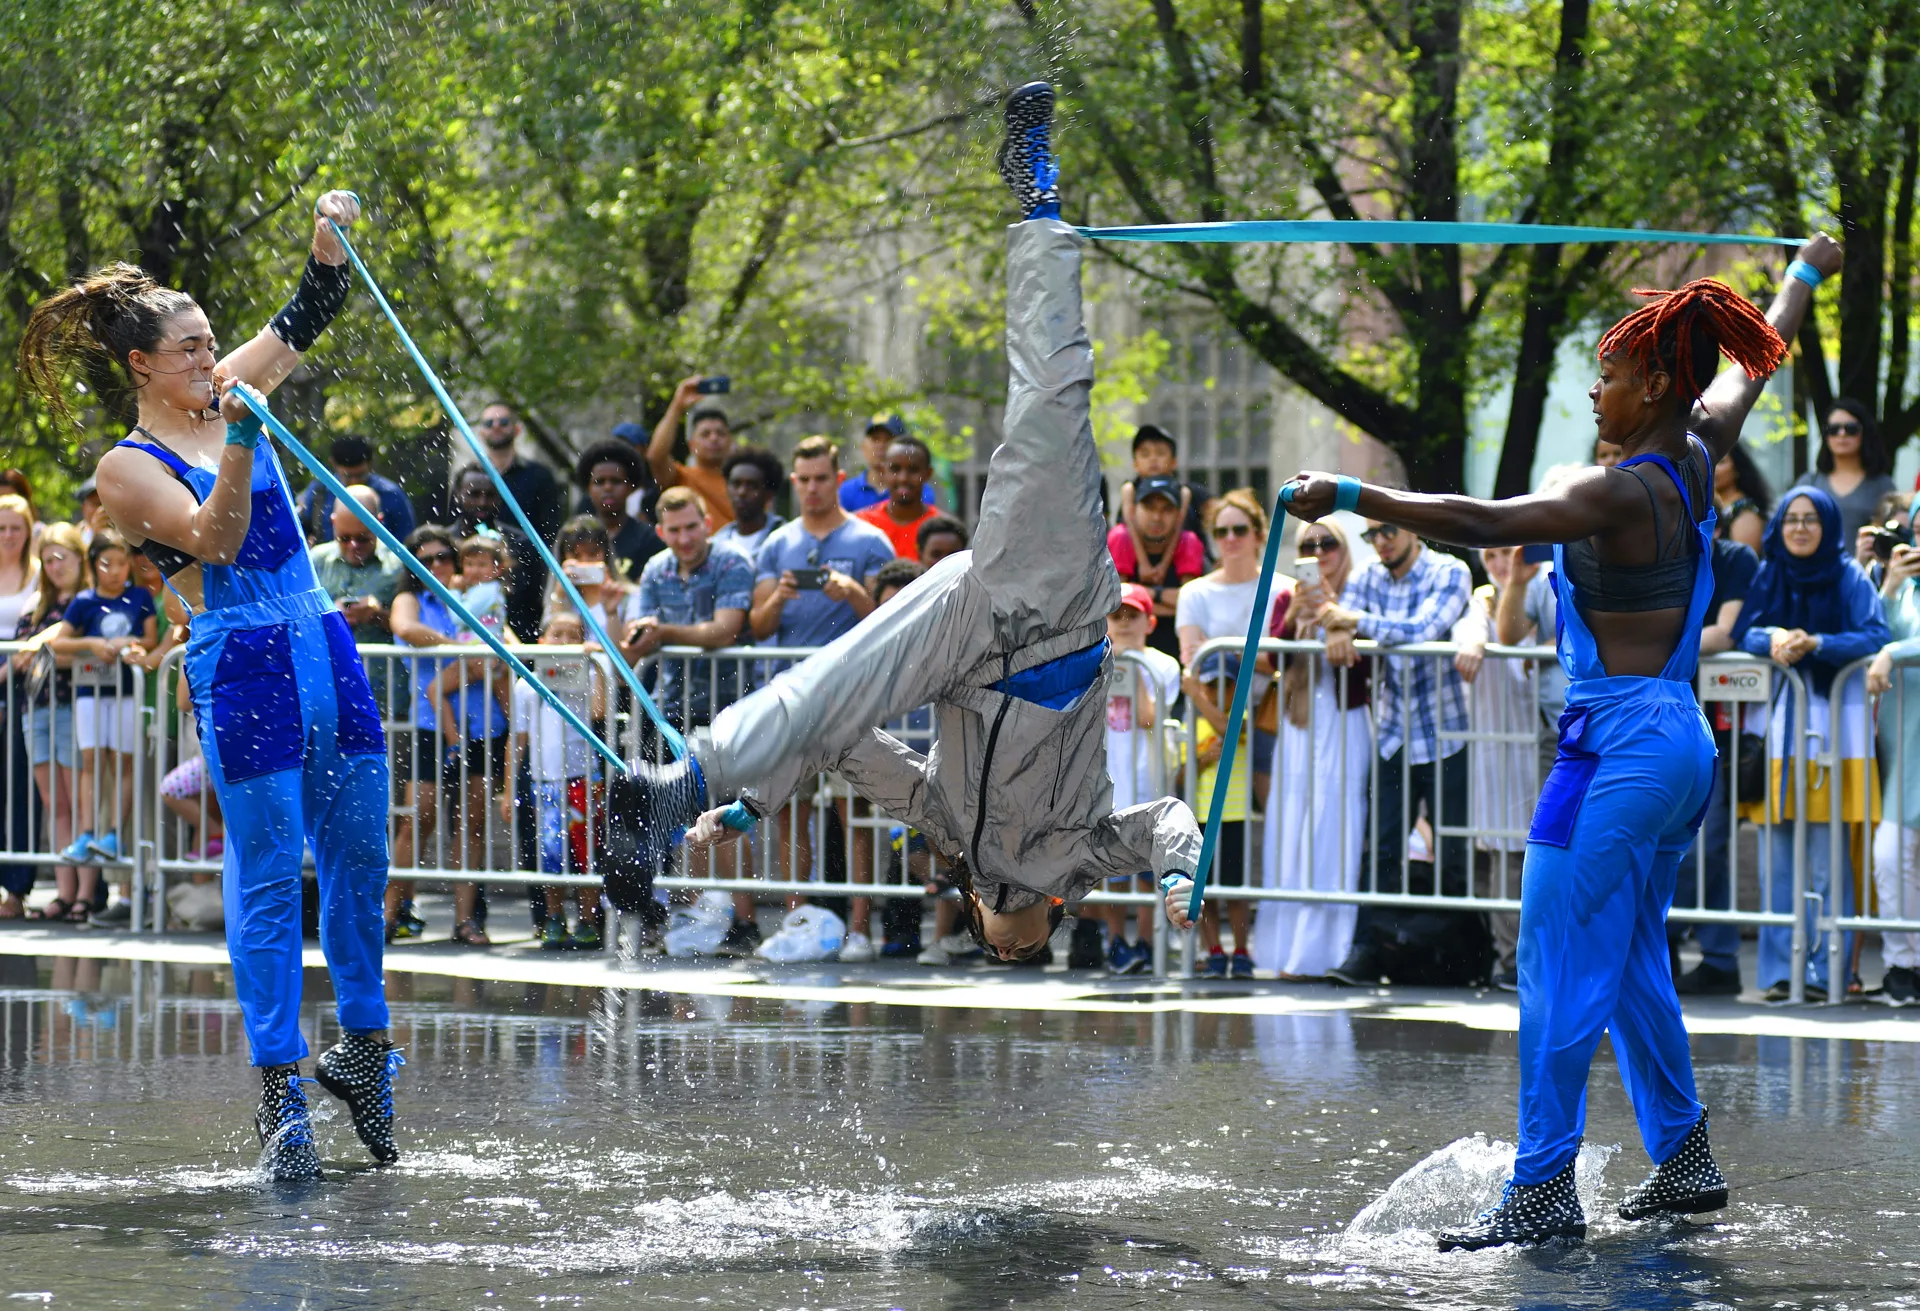 Three dancers perform outdoors in front of a crowd. They are standing in a shallow fountain. Two dancers wearing blue coveralls are supporting a third dancer doing a flip with blue straps.